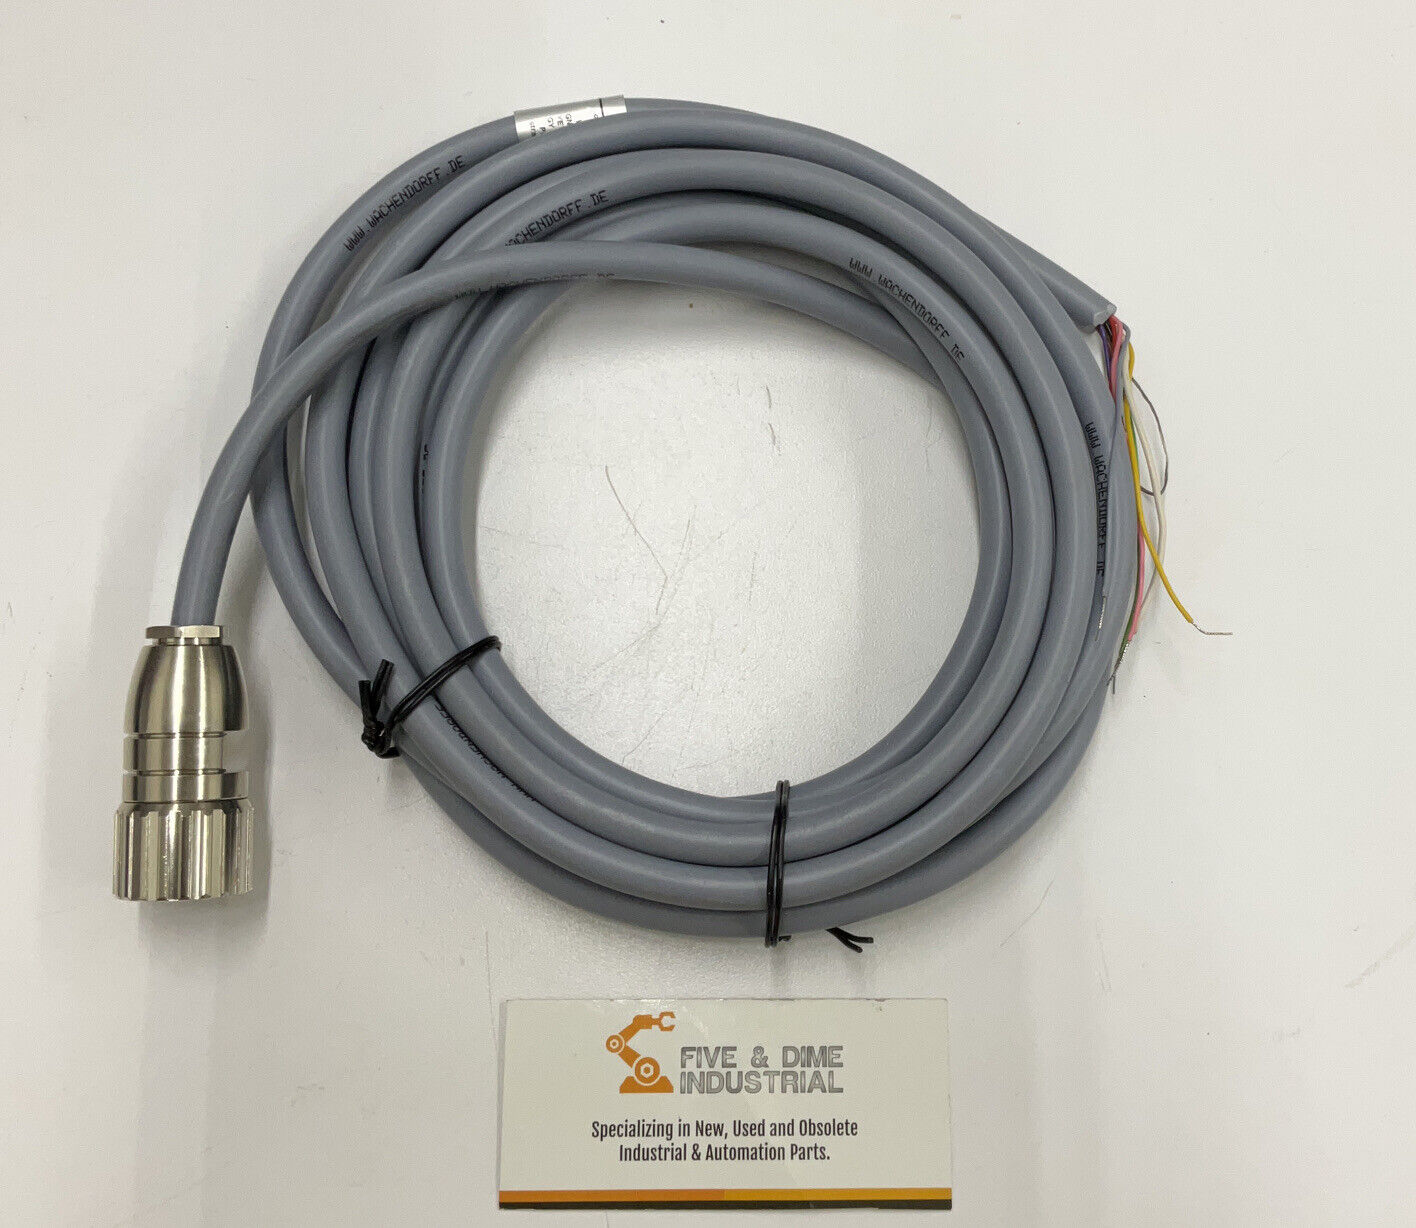 Wachendorff KD126704 Terminal Cable for Encoder (CL356)